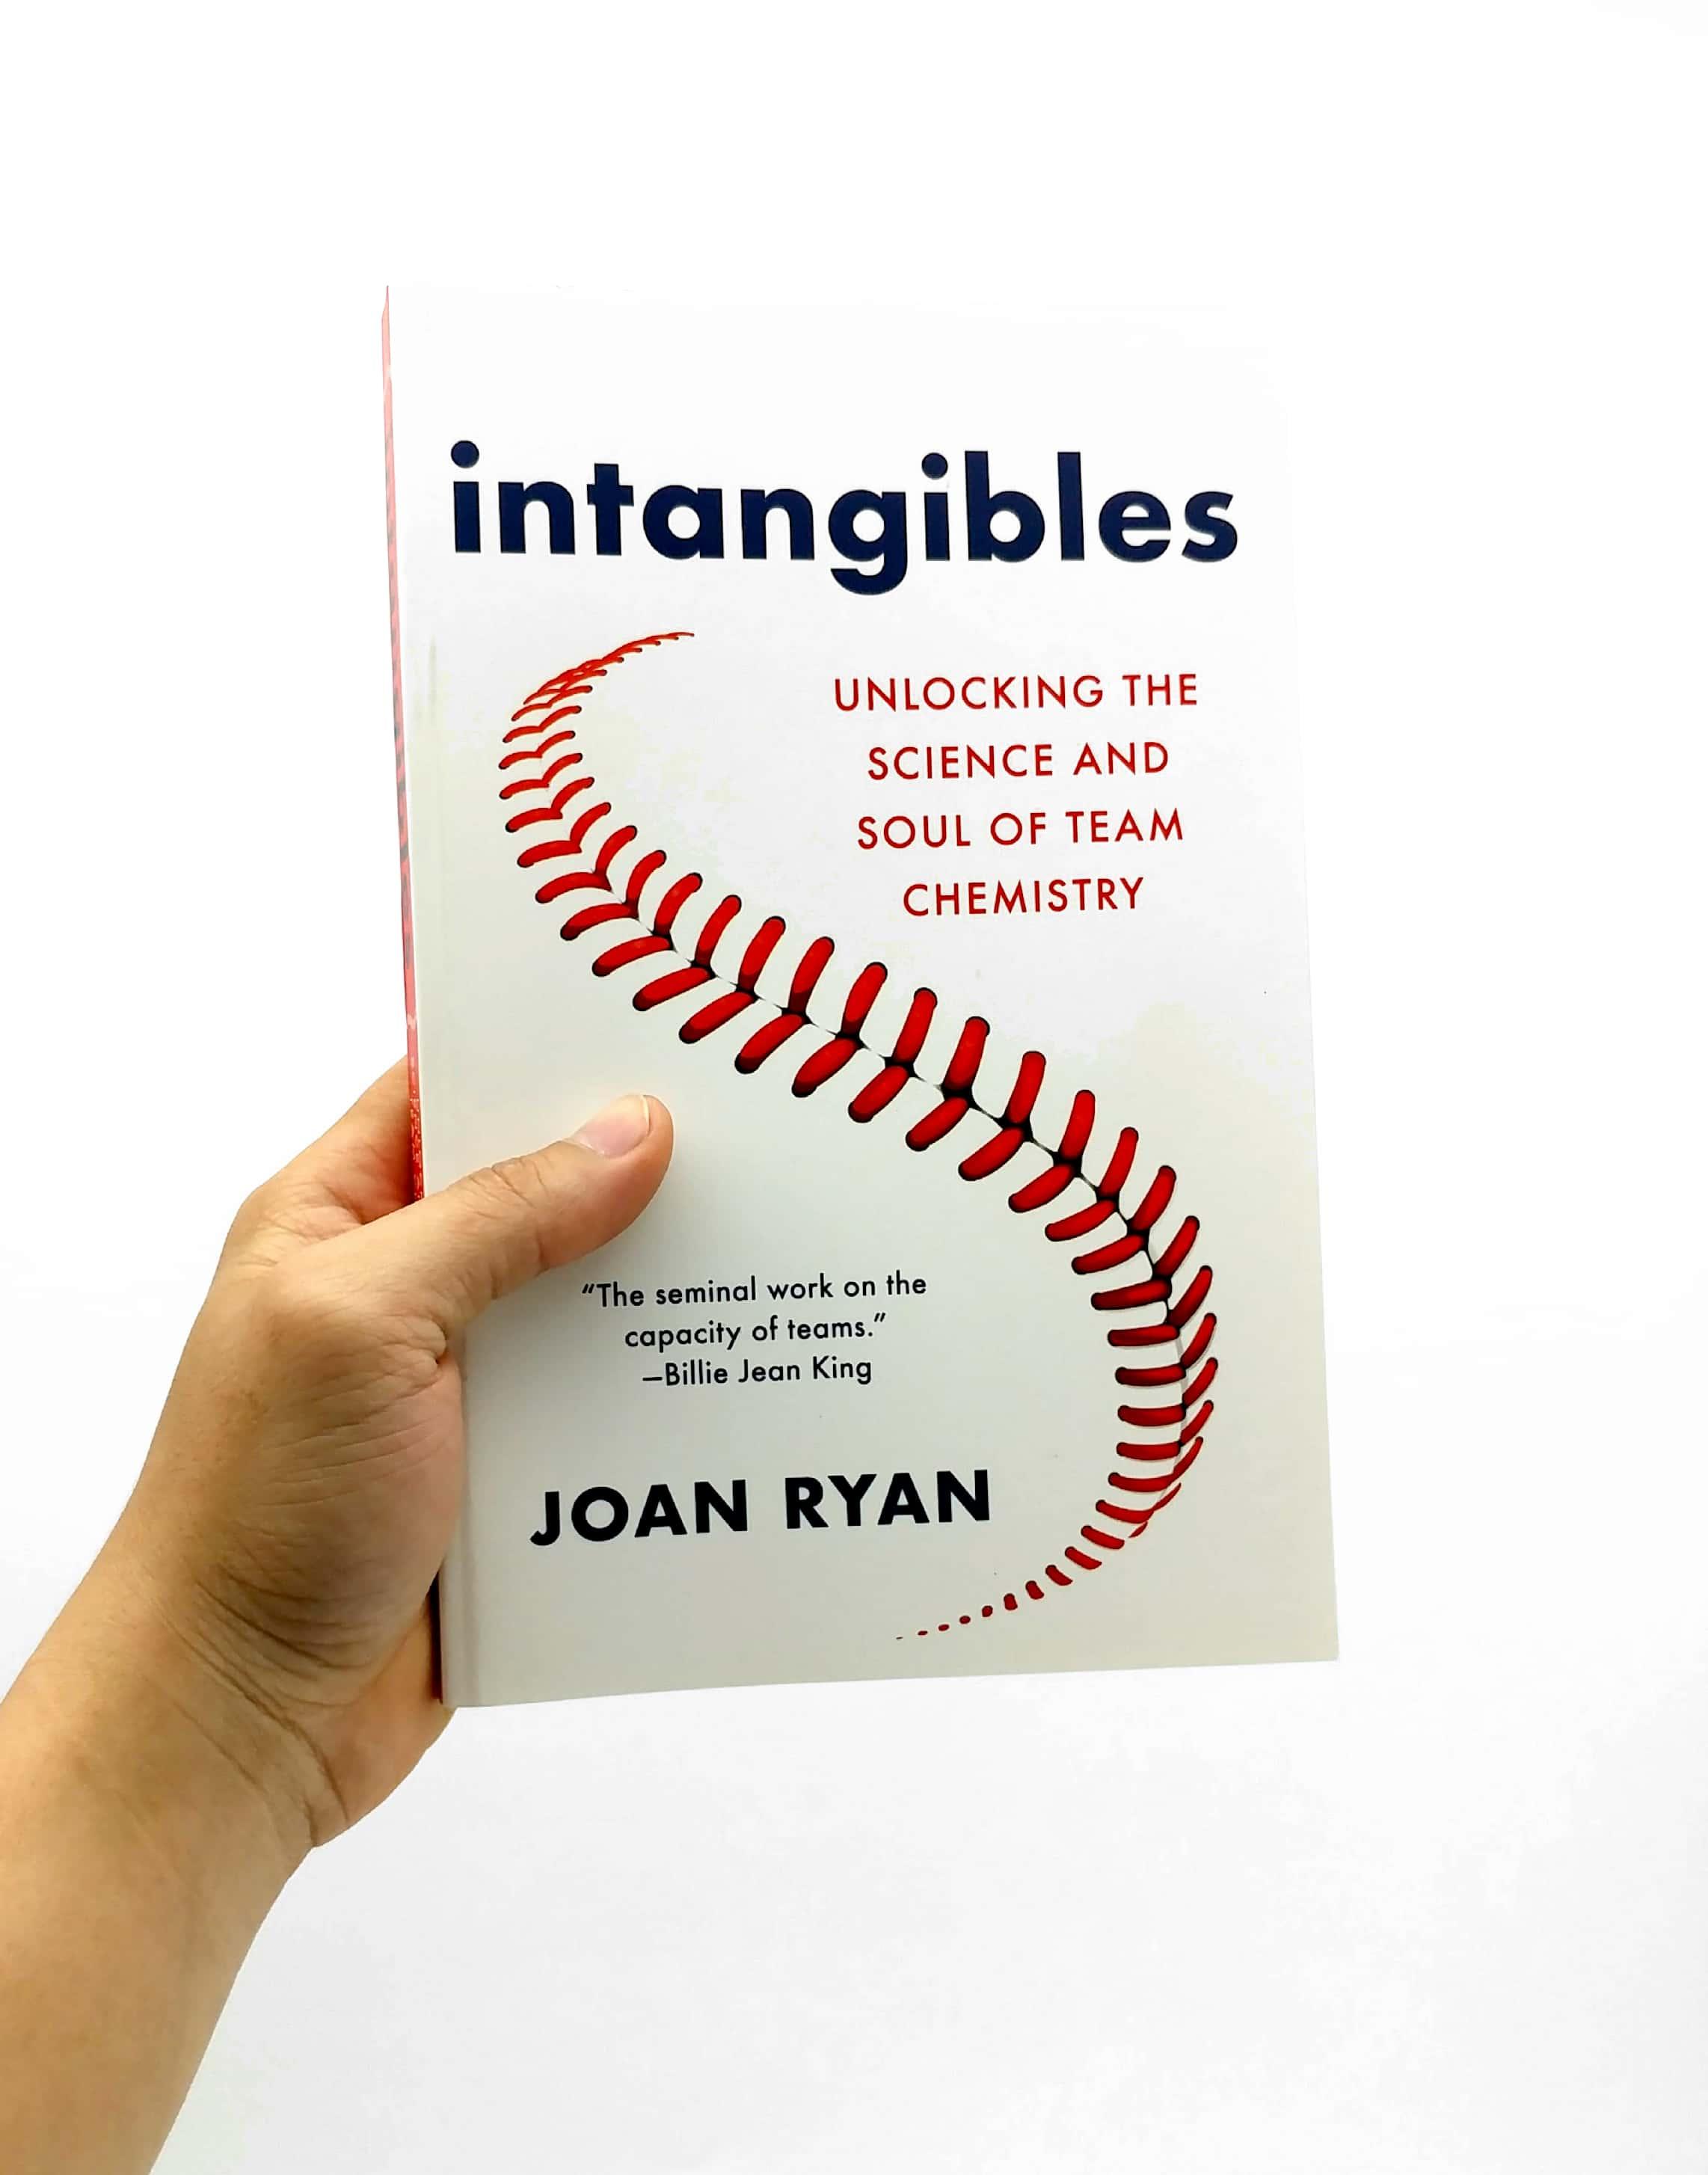 Intangibles: Unlocking The Science And Soul Of Team Chemistry